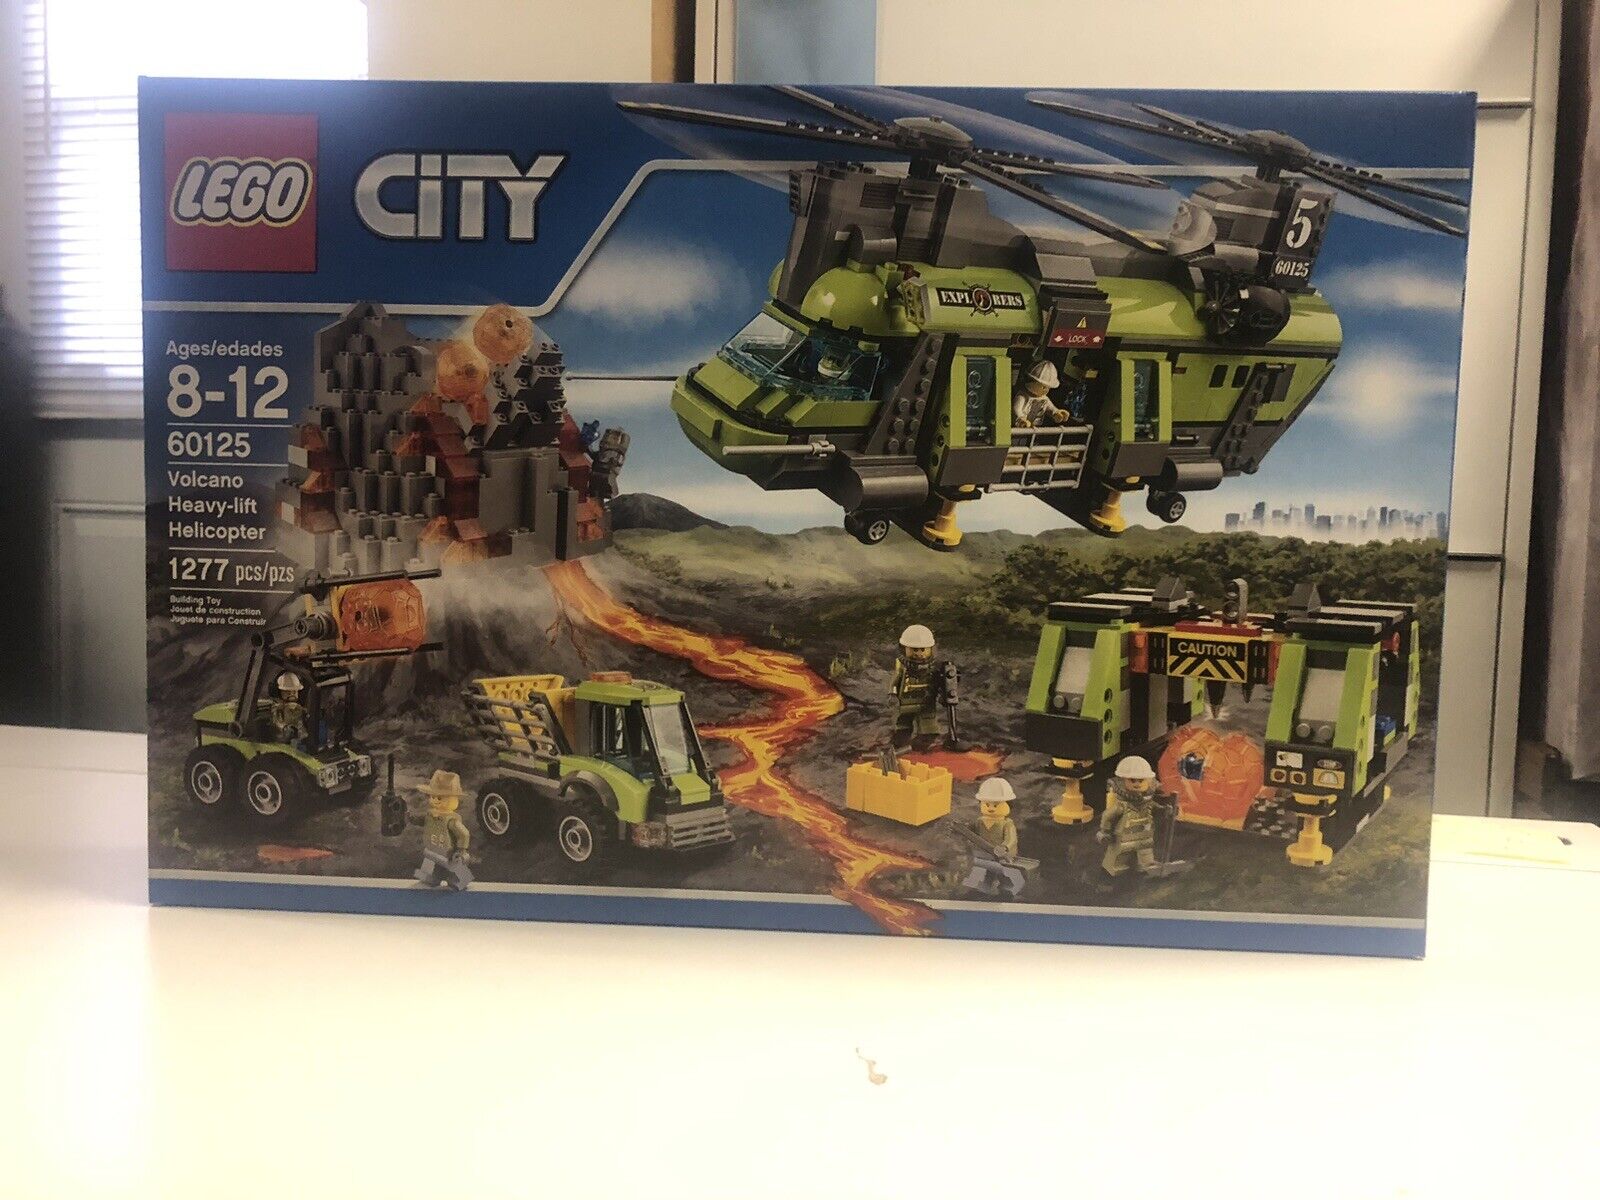 LEGO CITY: Volcano Heavy-lift Helicopter (60125) Retired New In Sealed Box